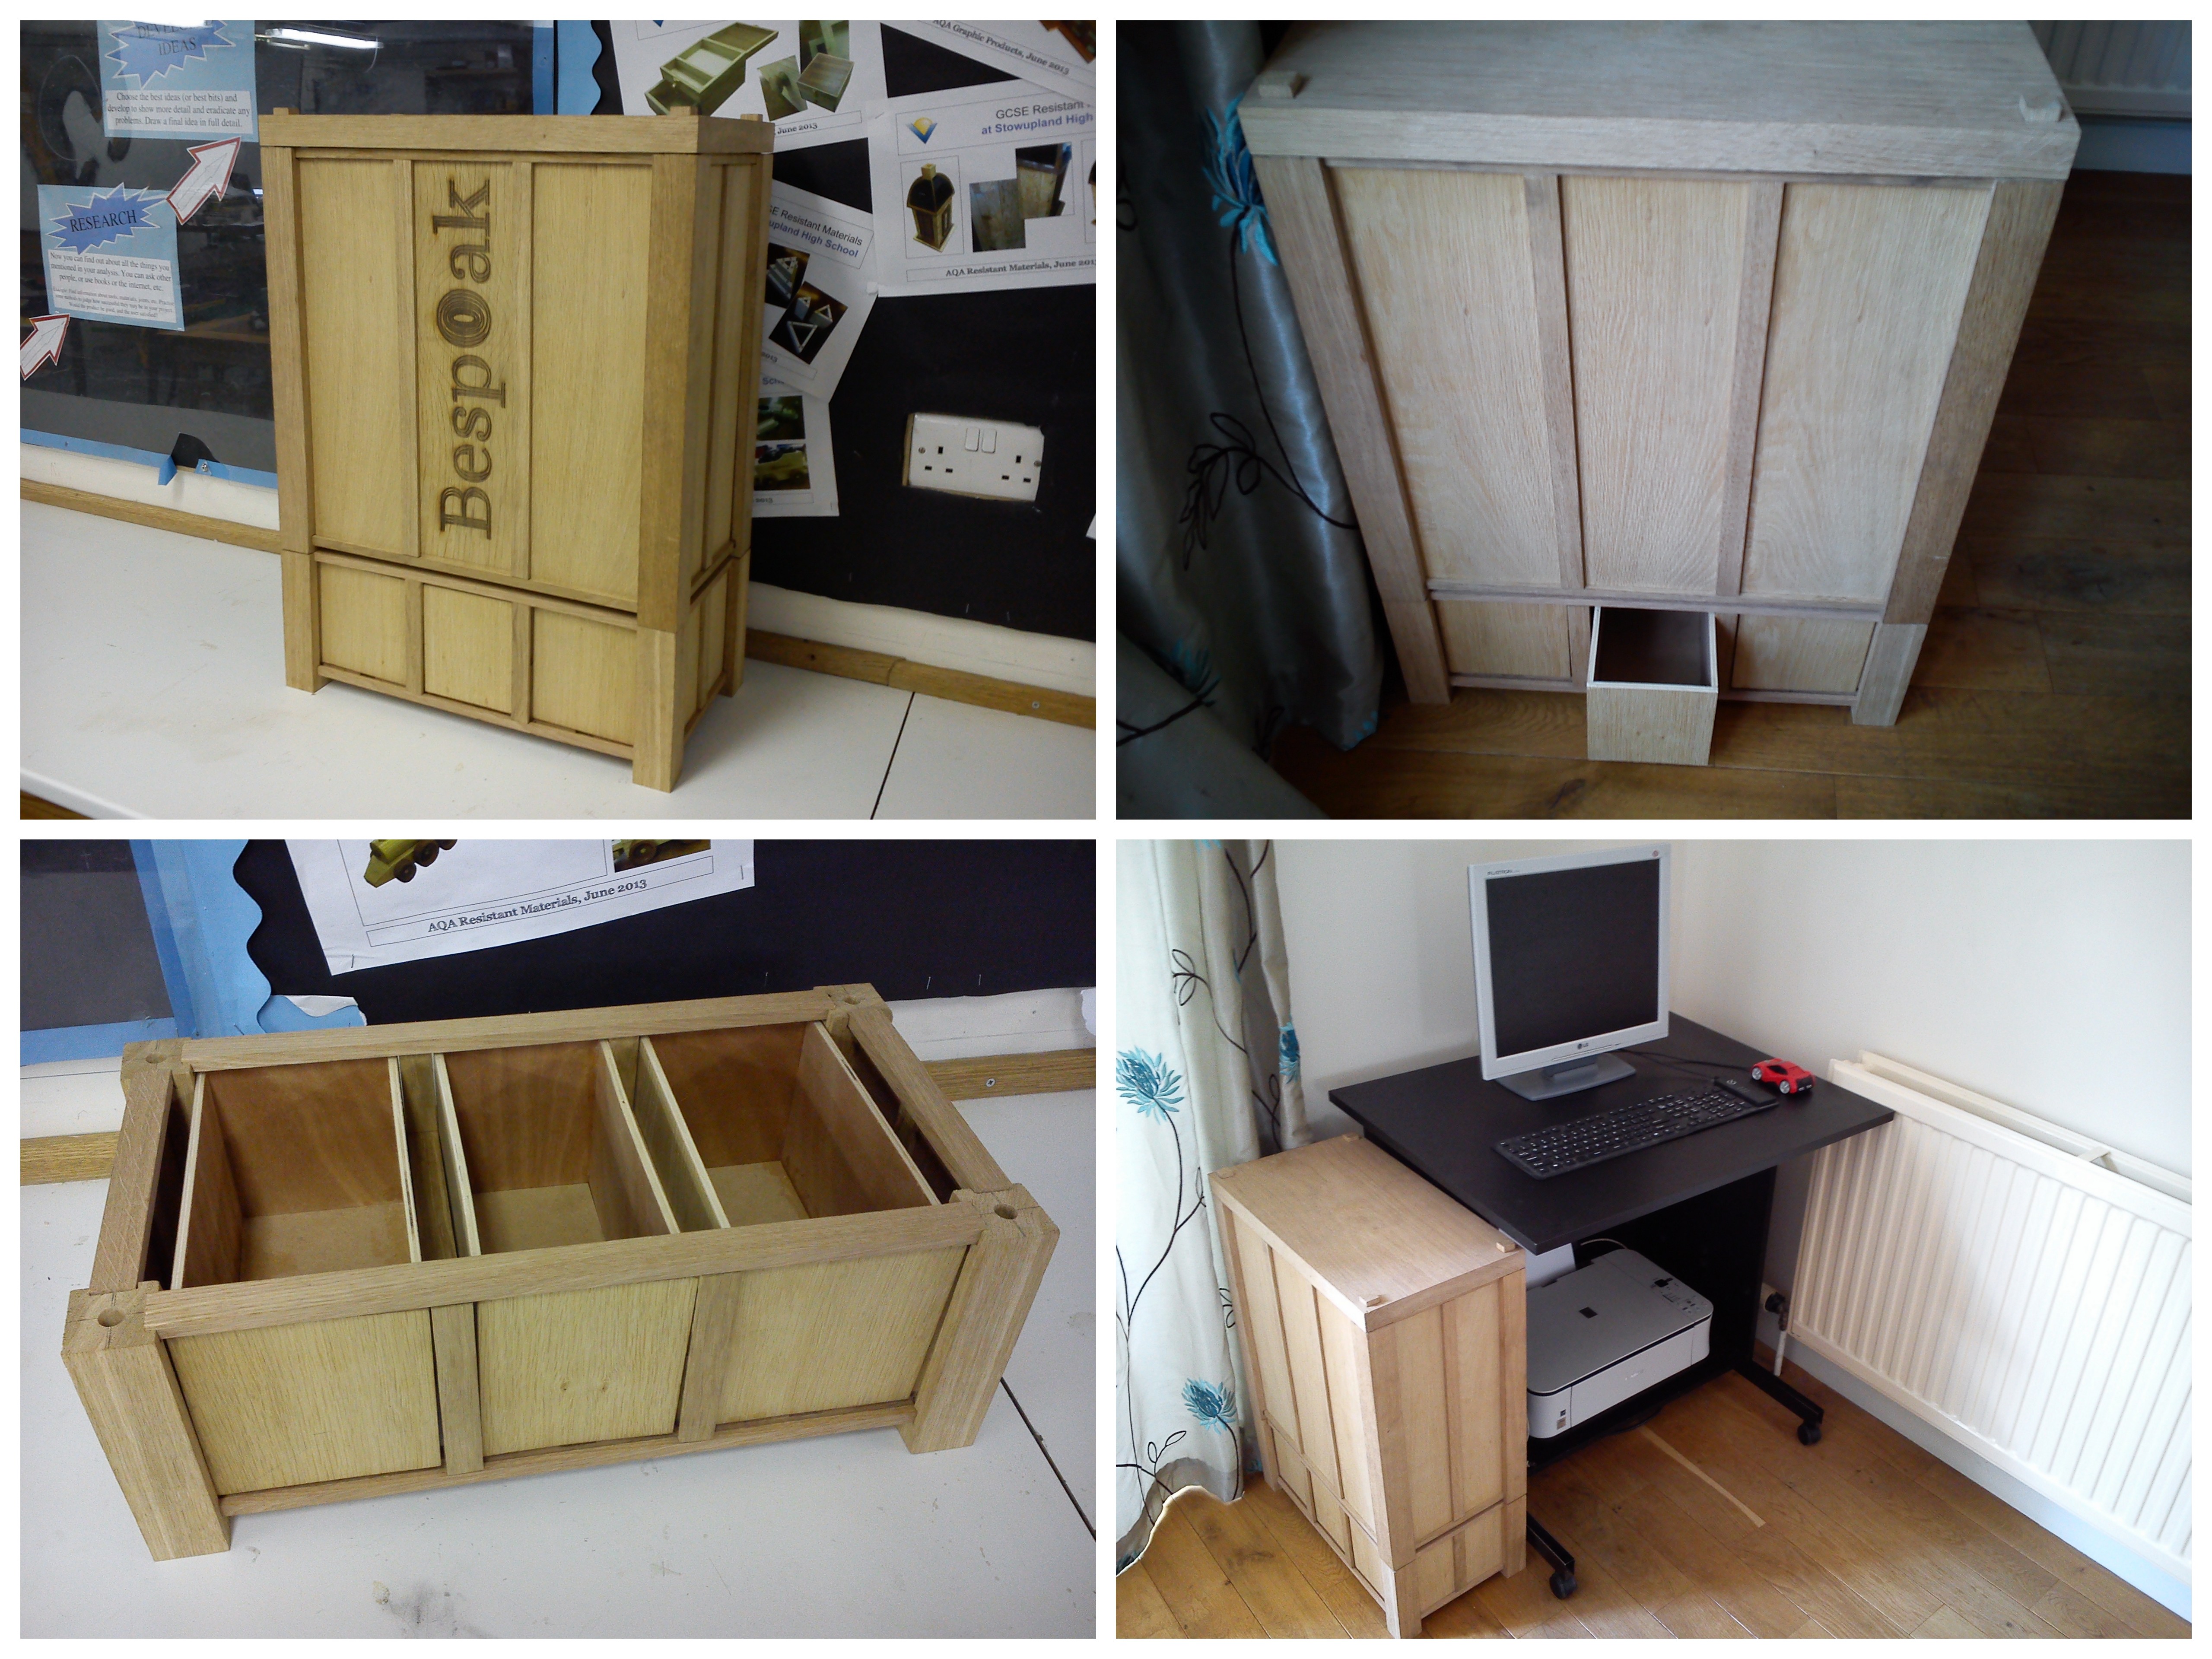 Pictures of my A2 Product Design Wooden Desktop Computer Case